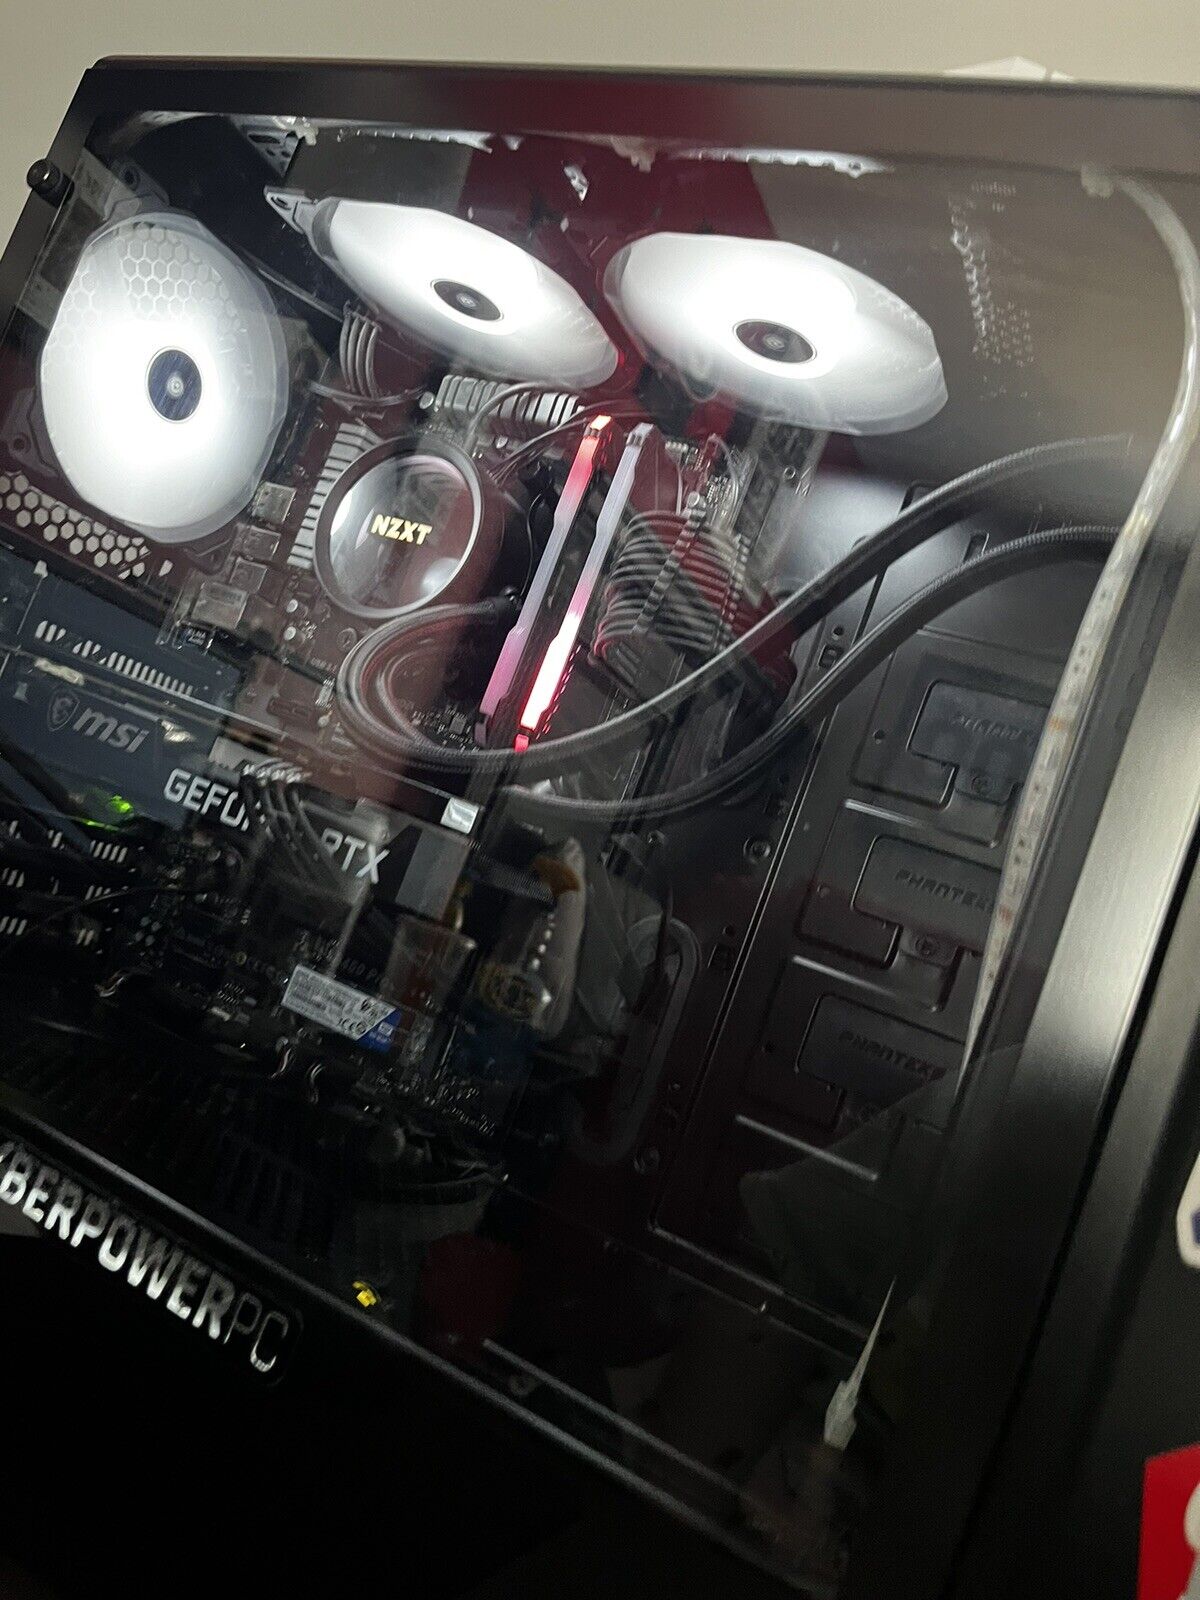 High End Photoshop/ Gaming PC